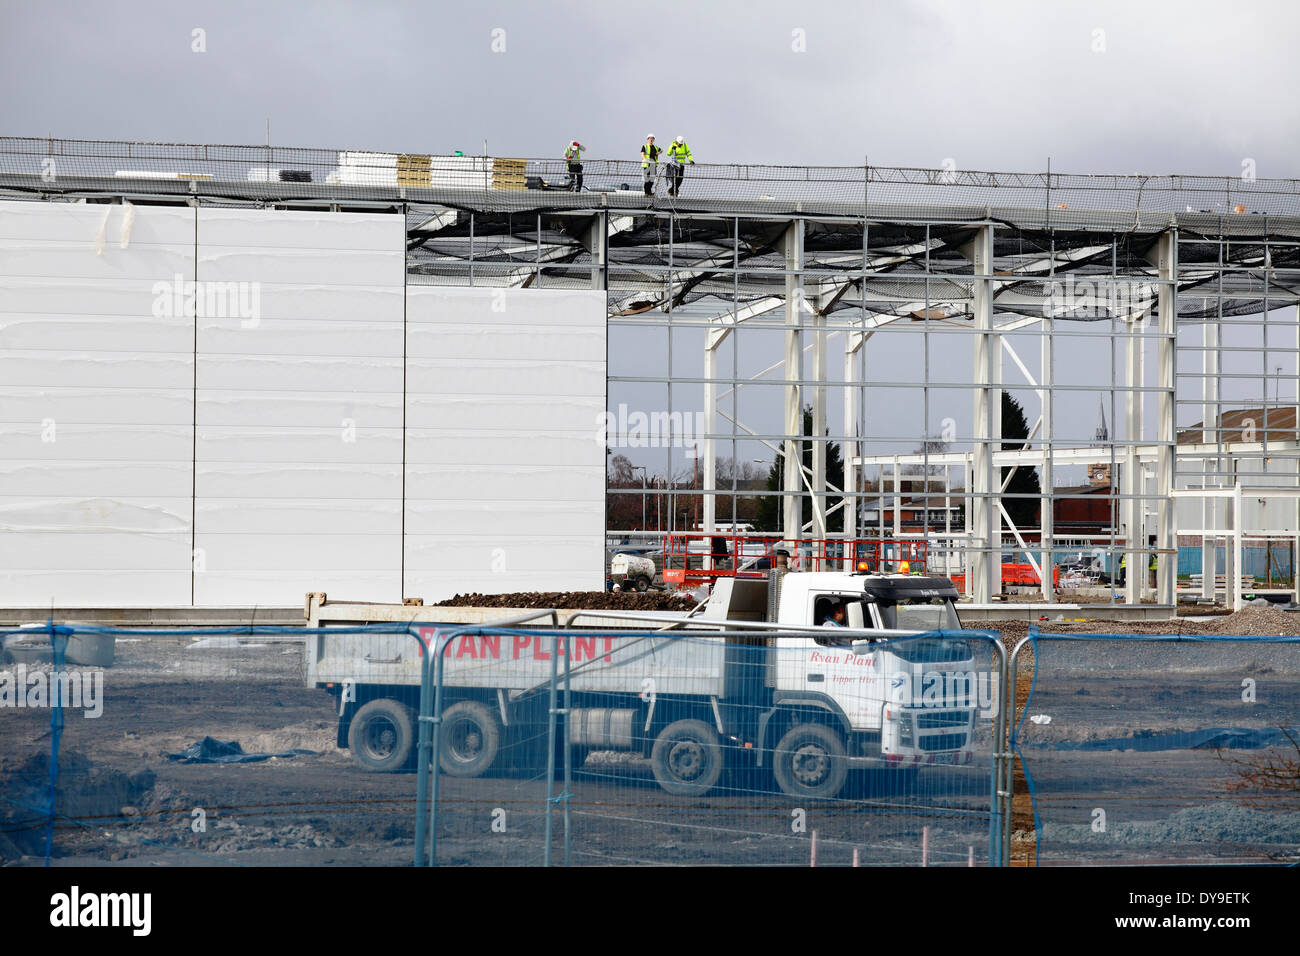 A warehouse under construction in Scotland, UK Stock Photo